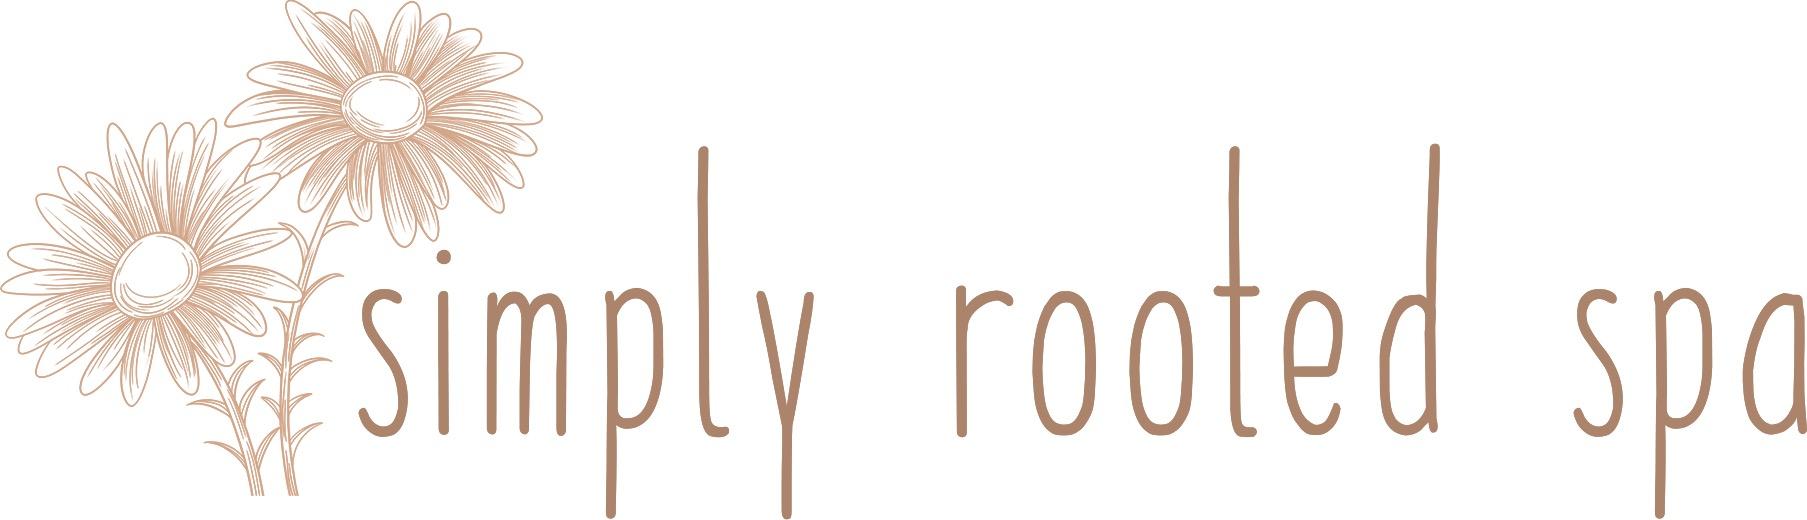 simply rooted spa logo